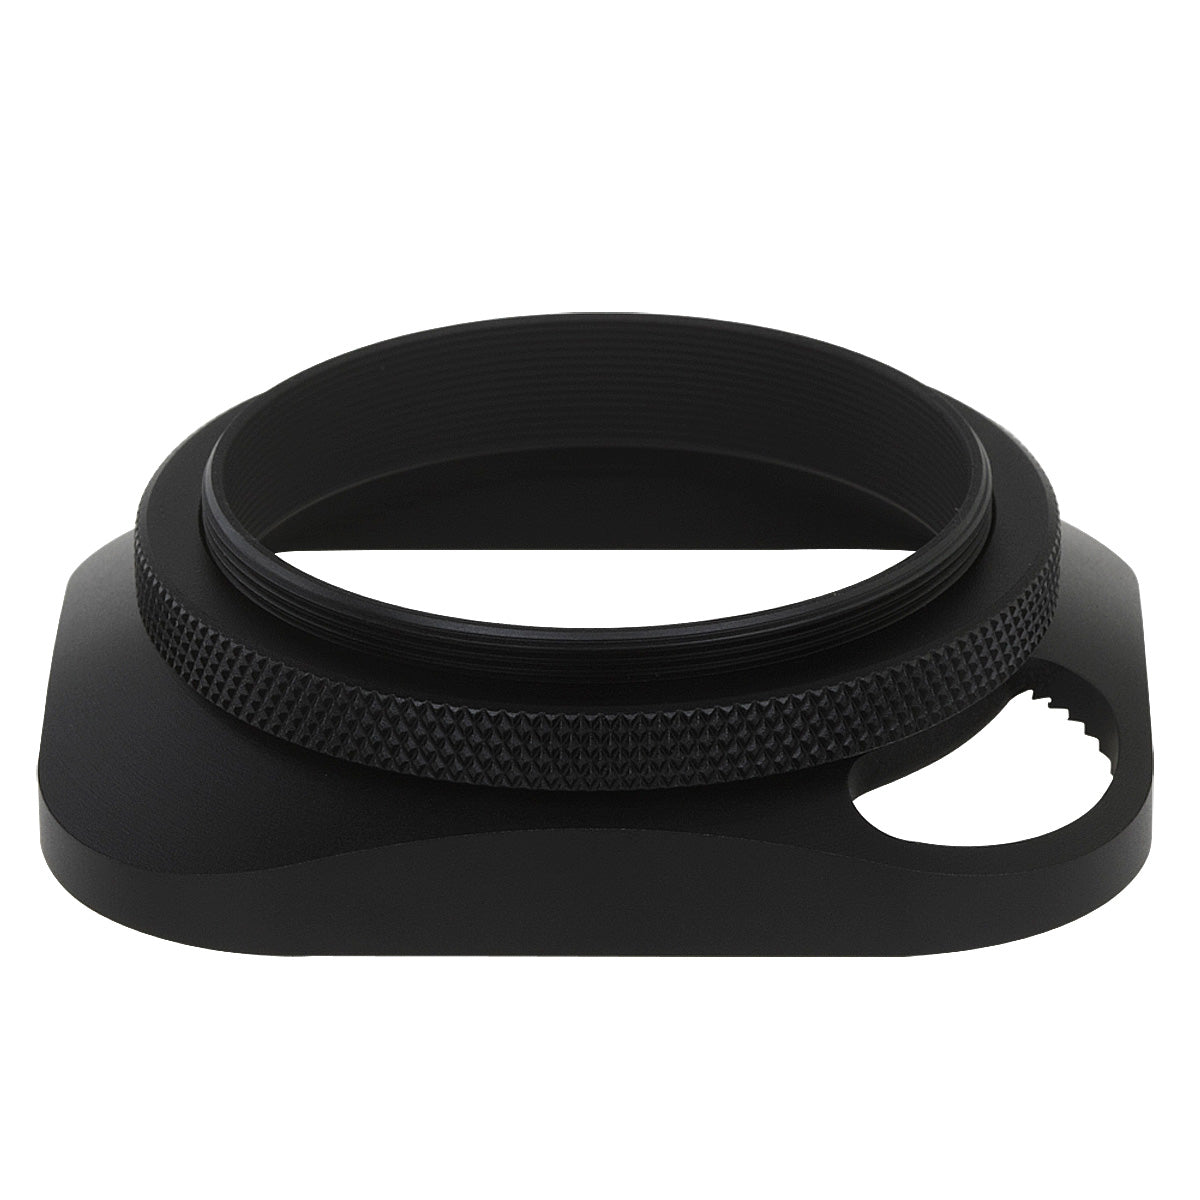 Haoge LH-E2P 49mm Square Metal Screw-in Lens Hood Hollow Out Designed with Cap for Leica Rangefinder Camera with 49mm E49 Filter Thread Lens Black